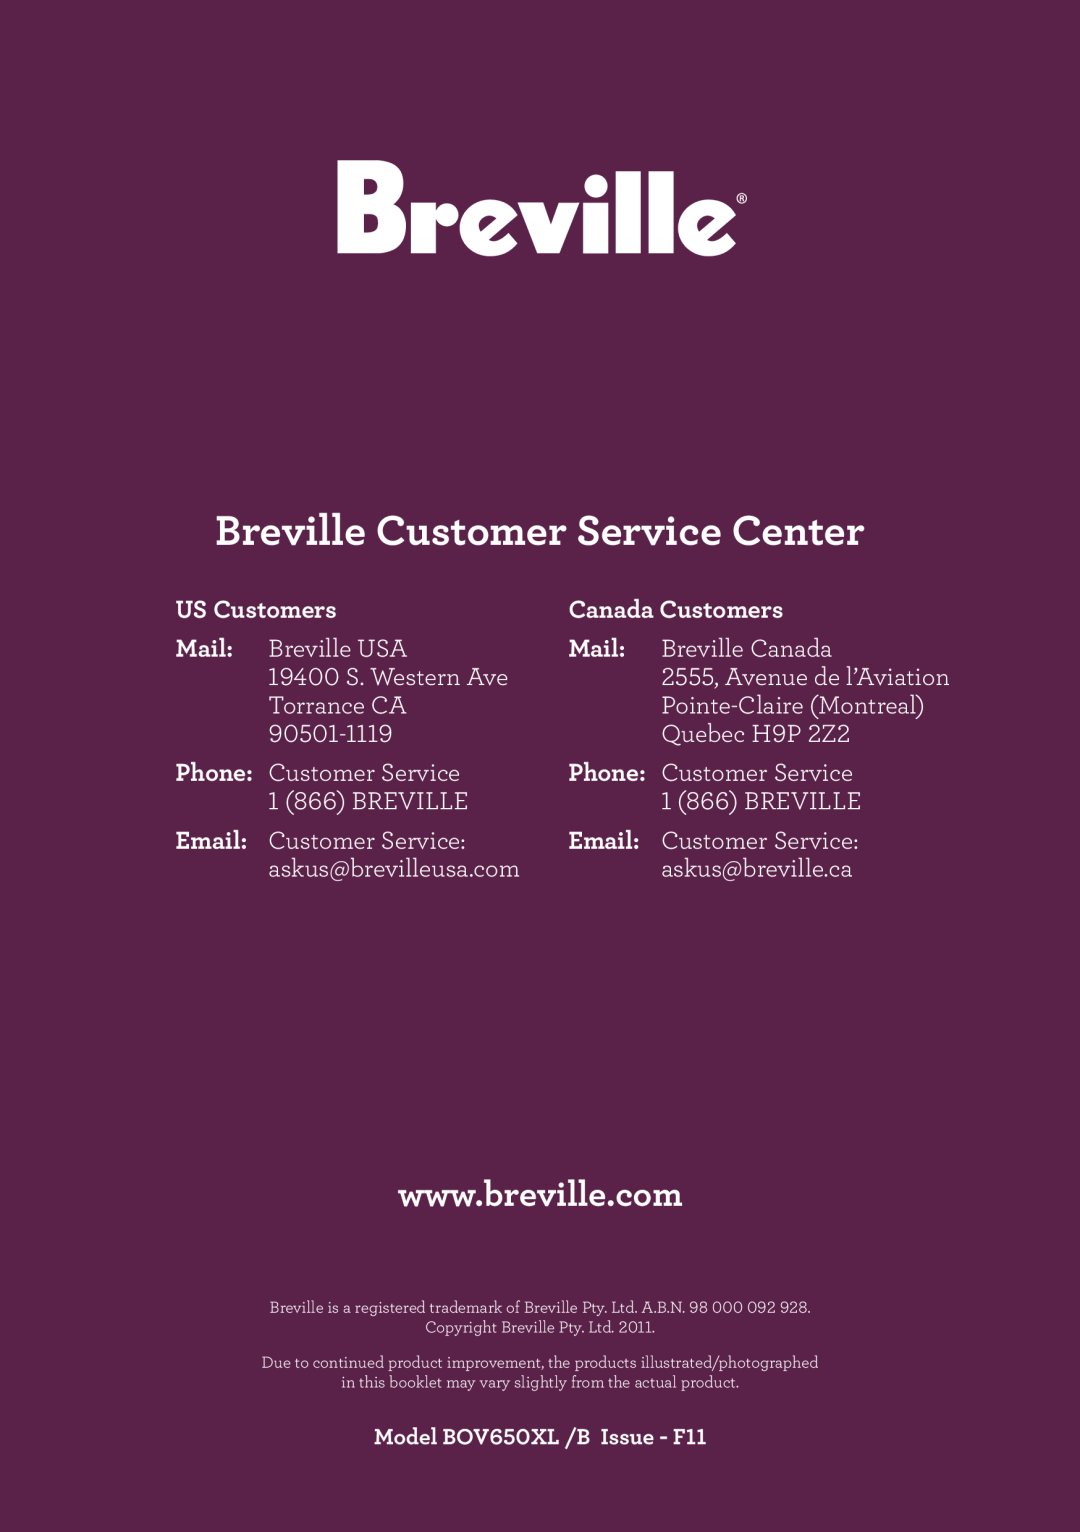 Breville Breville Compact Smart Oven manual US Customers, Canada Customers, Mail, Email, Breville Customer Service Center 